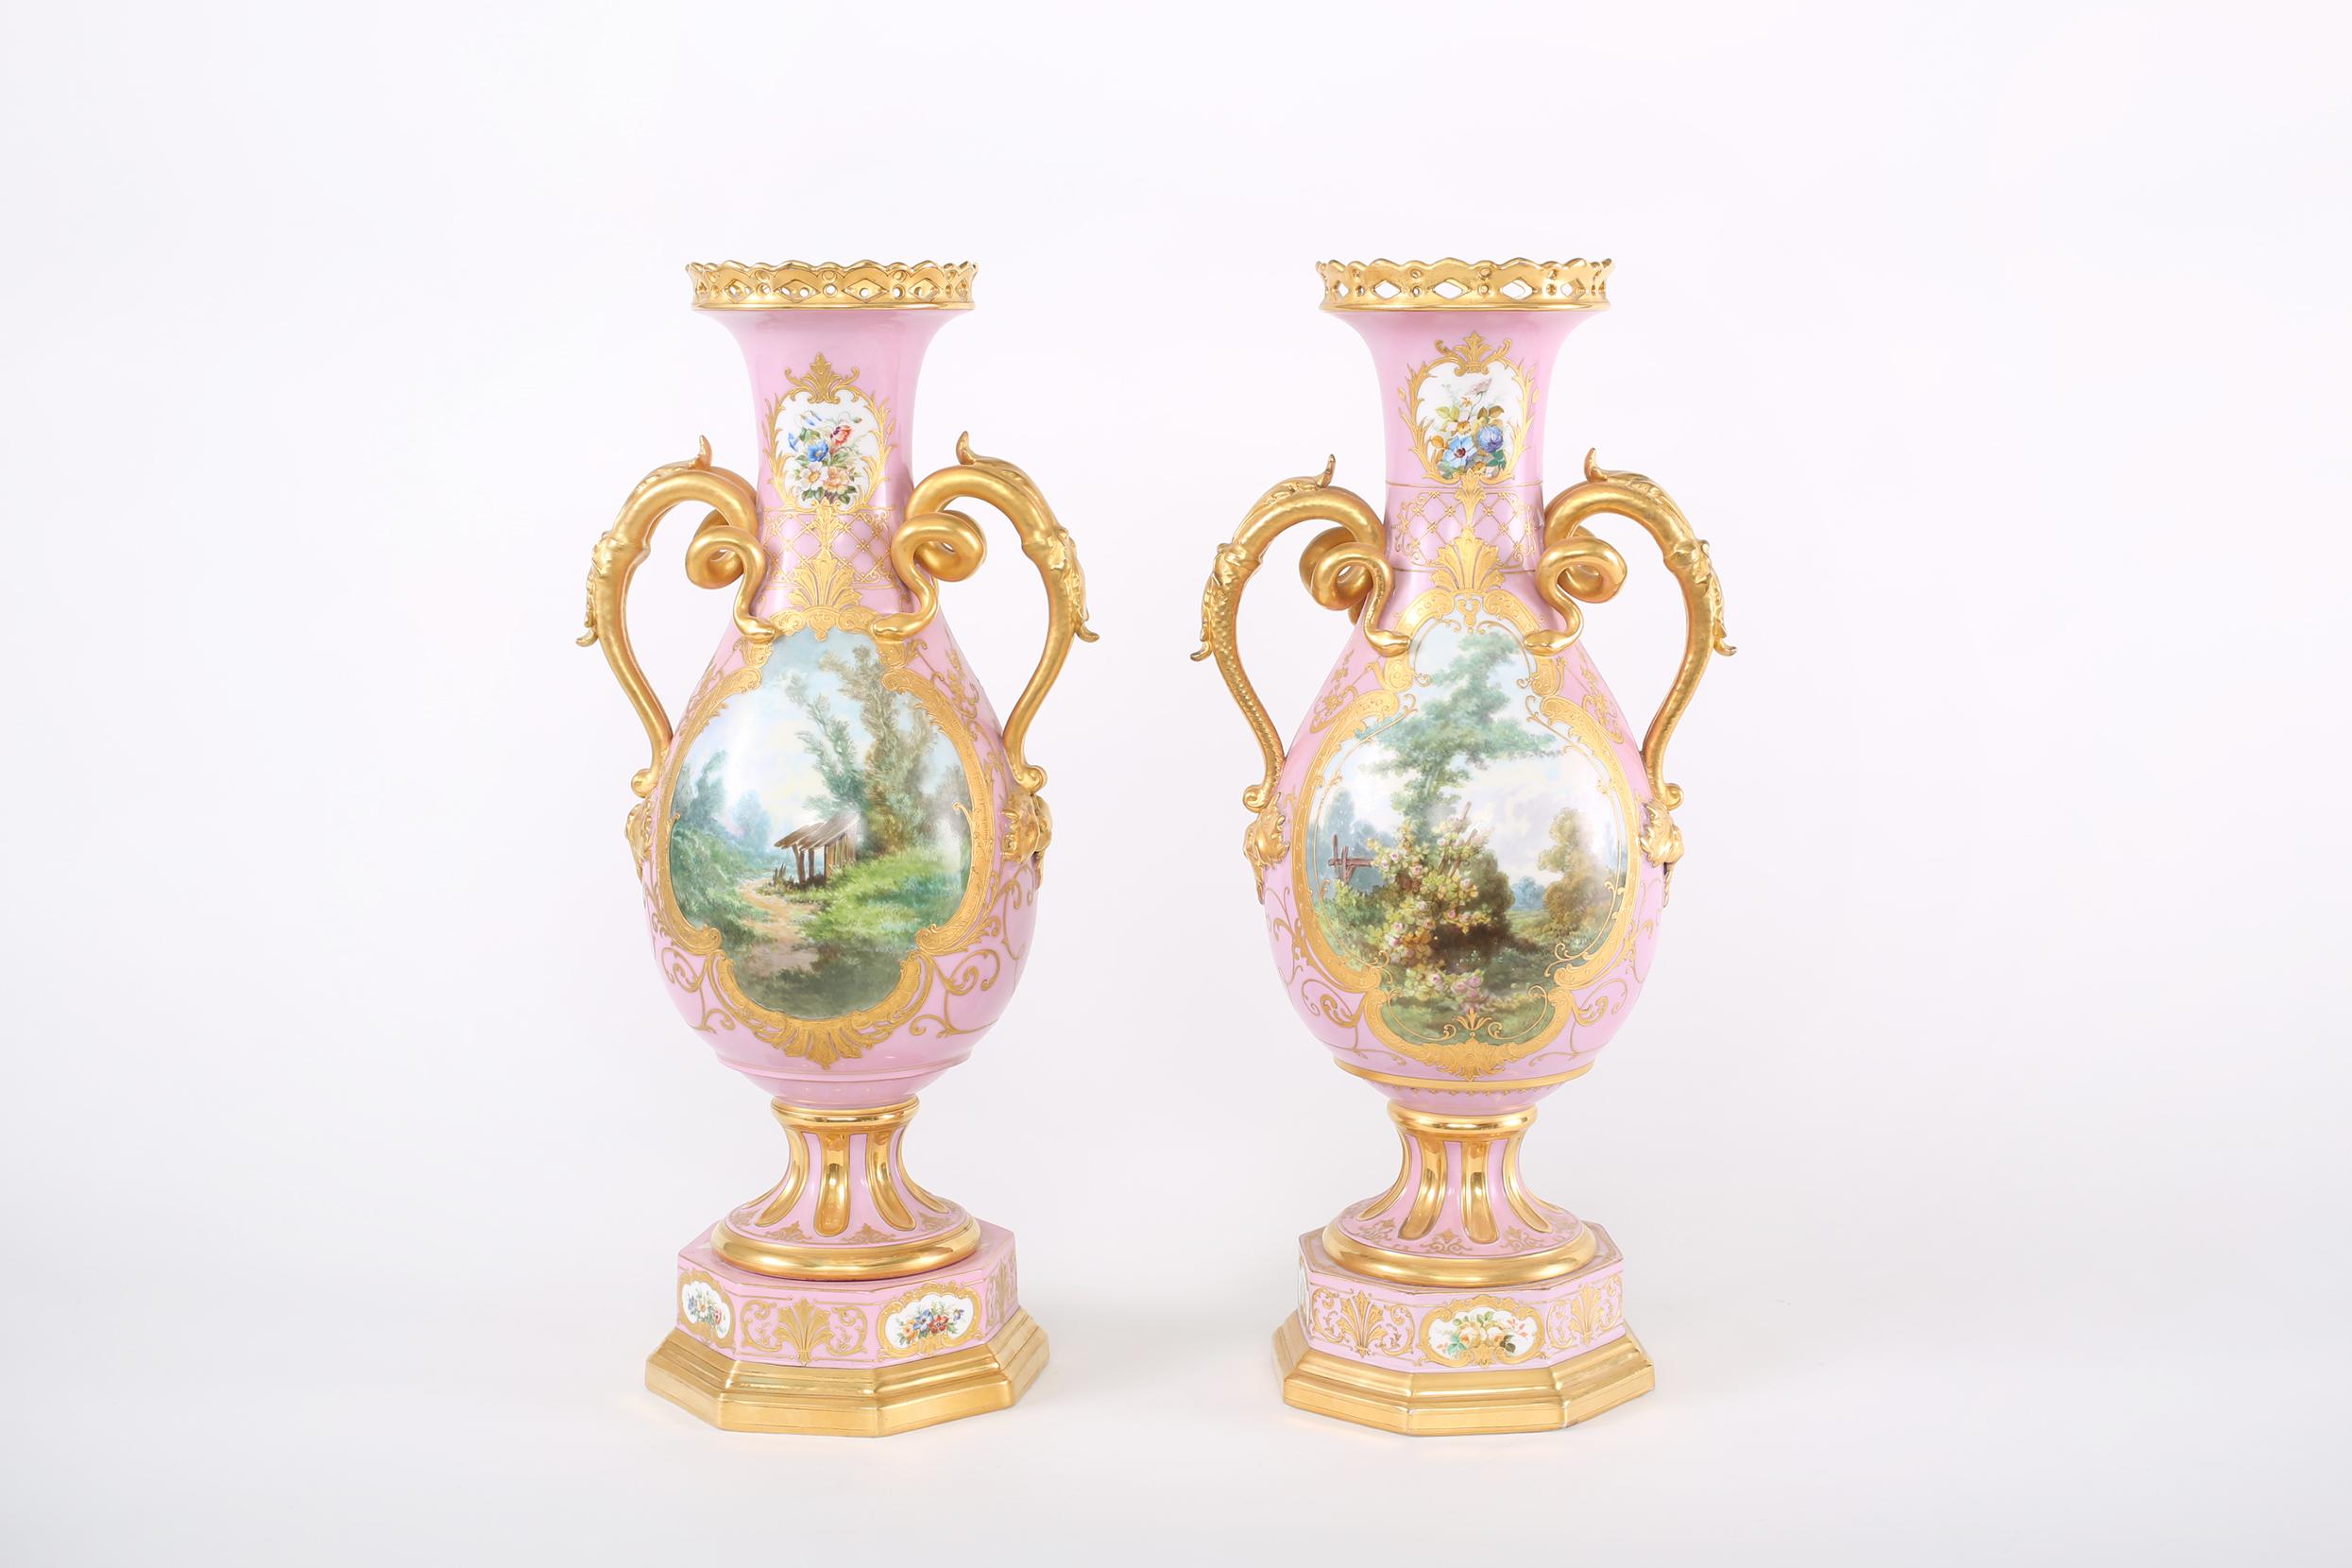 Early 19th century pair gilt porcelain decorative urns / vases with gilt gold handles and exterior painted scene details. Each vase / urn is in great antique condition. Minor wear consistent with age / use. Numbered & Maker's mark undersigned. Each